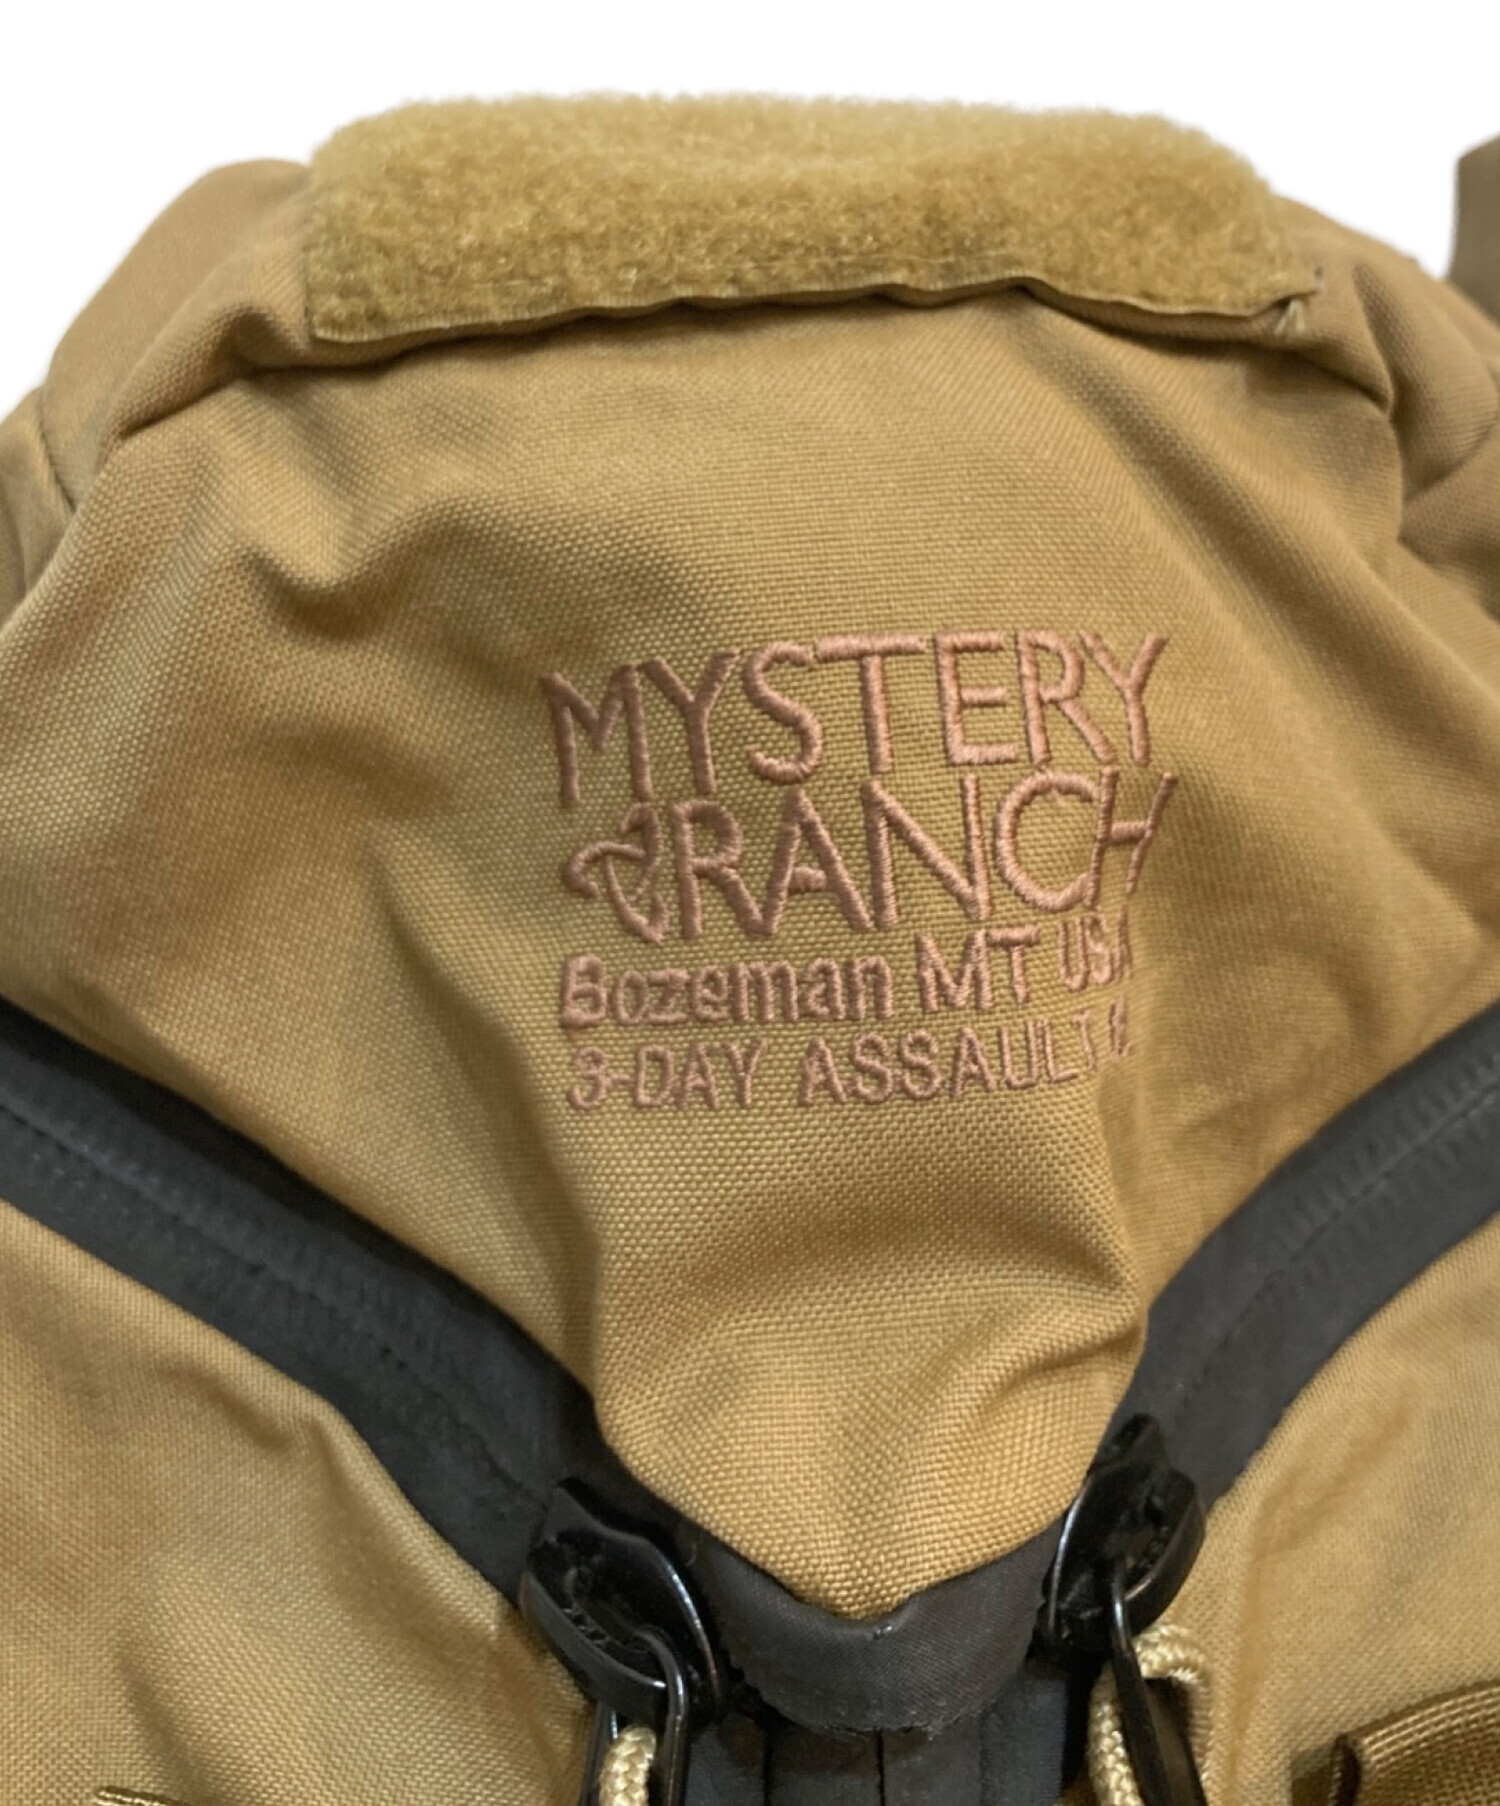 MYSTERY RANCH (ミステリーランチ) 3 Day Assault CL バックパック ベージュ